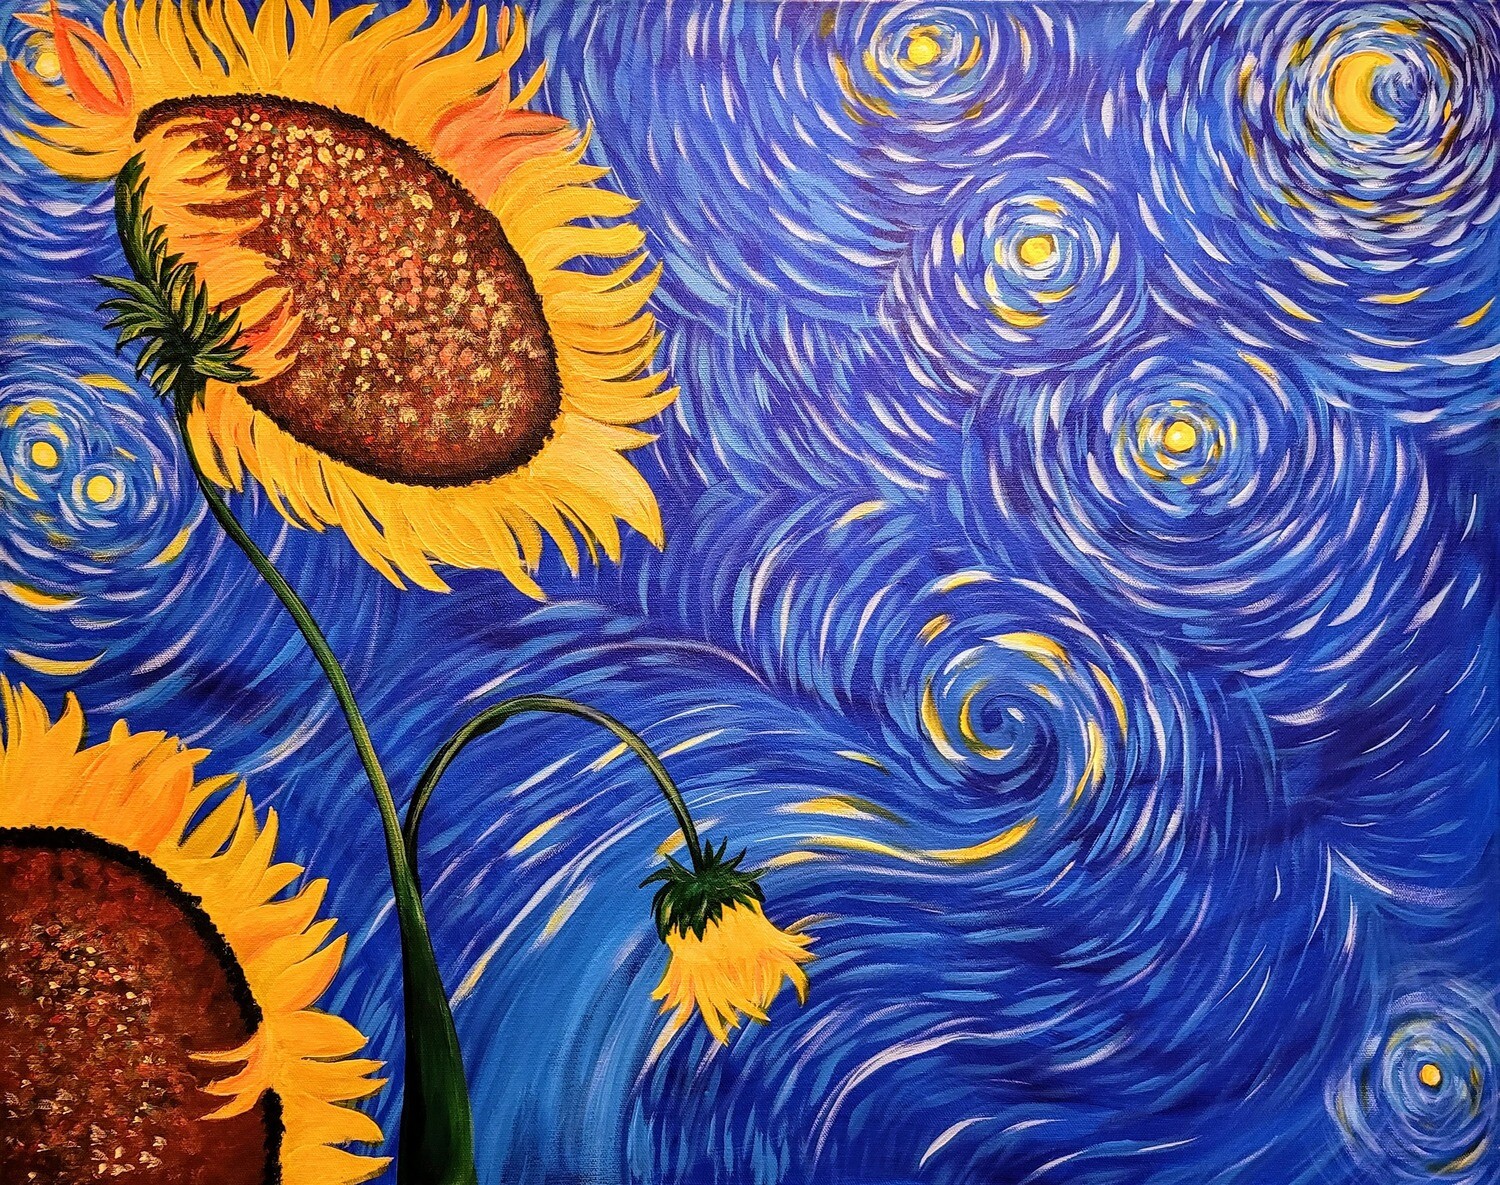 Painting: Starry Night inspired style Sunflowers